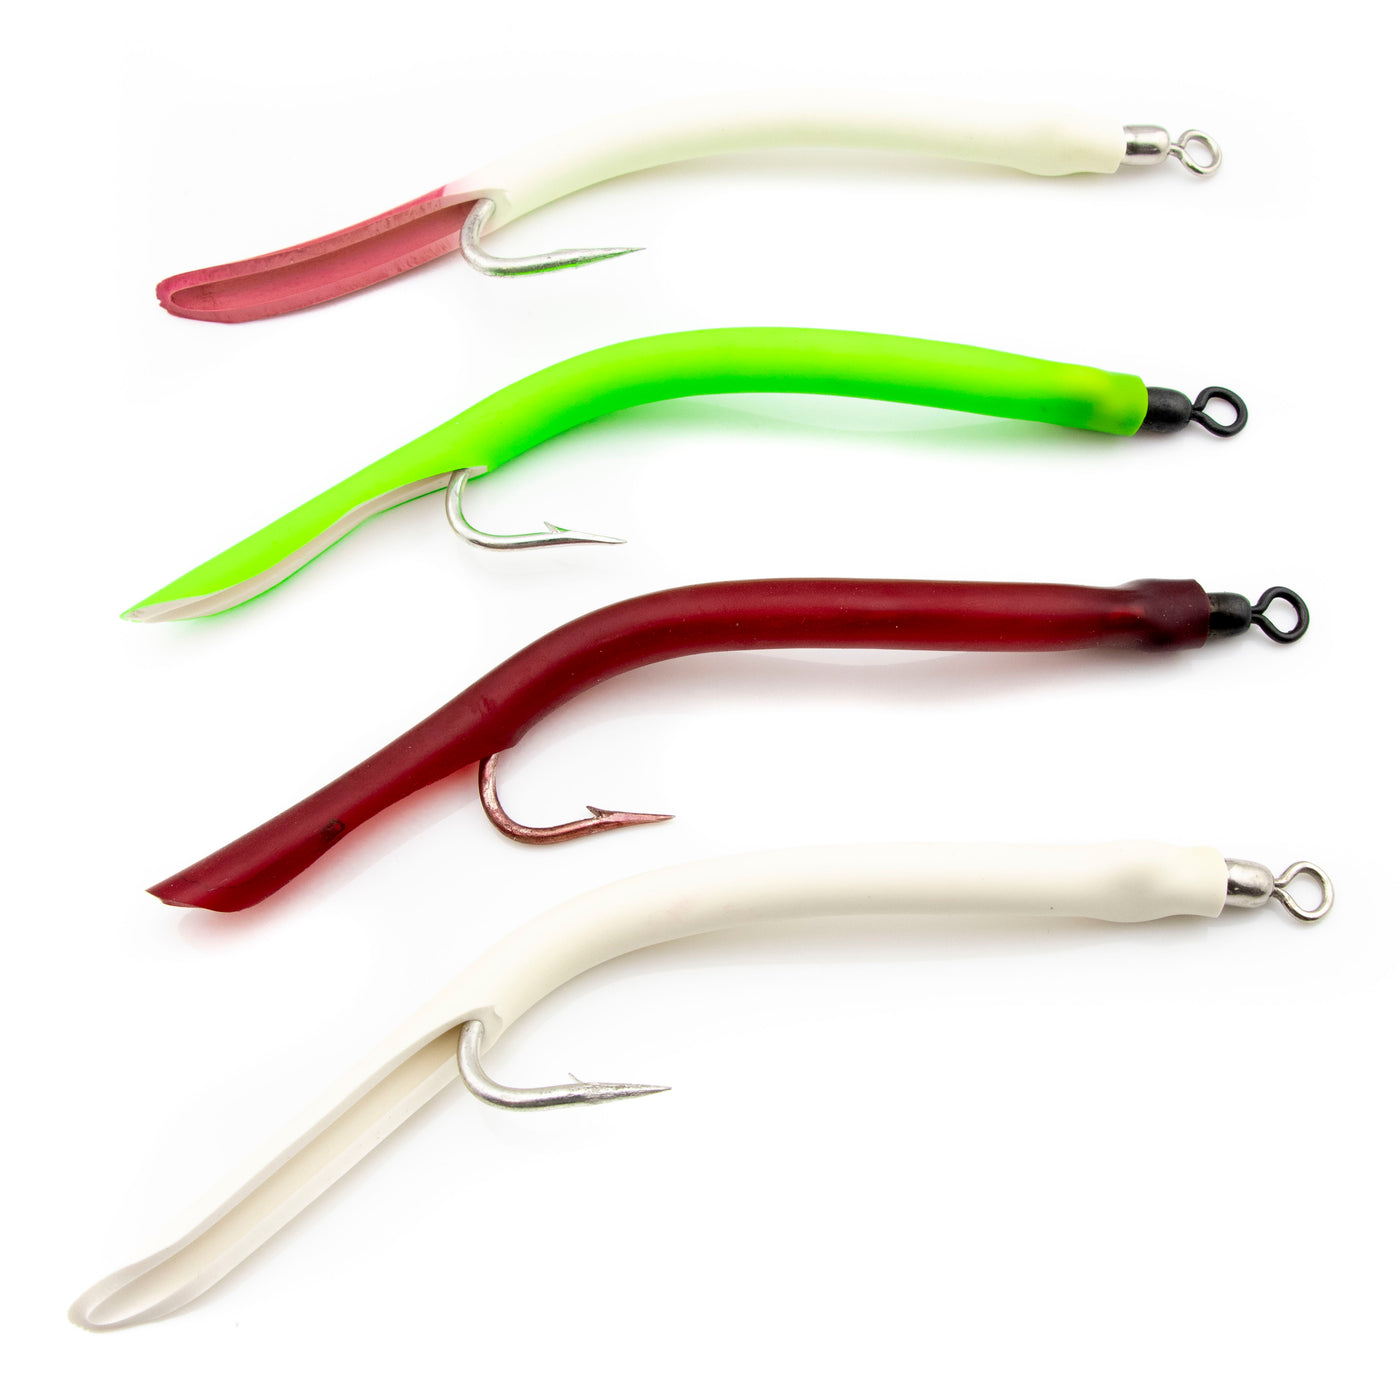 22 umbrella rigs trolling fishing soft lures with tripartite hook for  offshore.